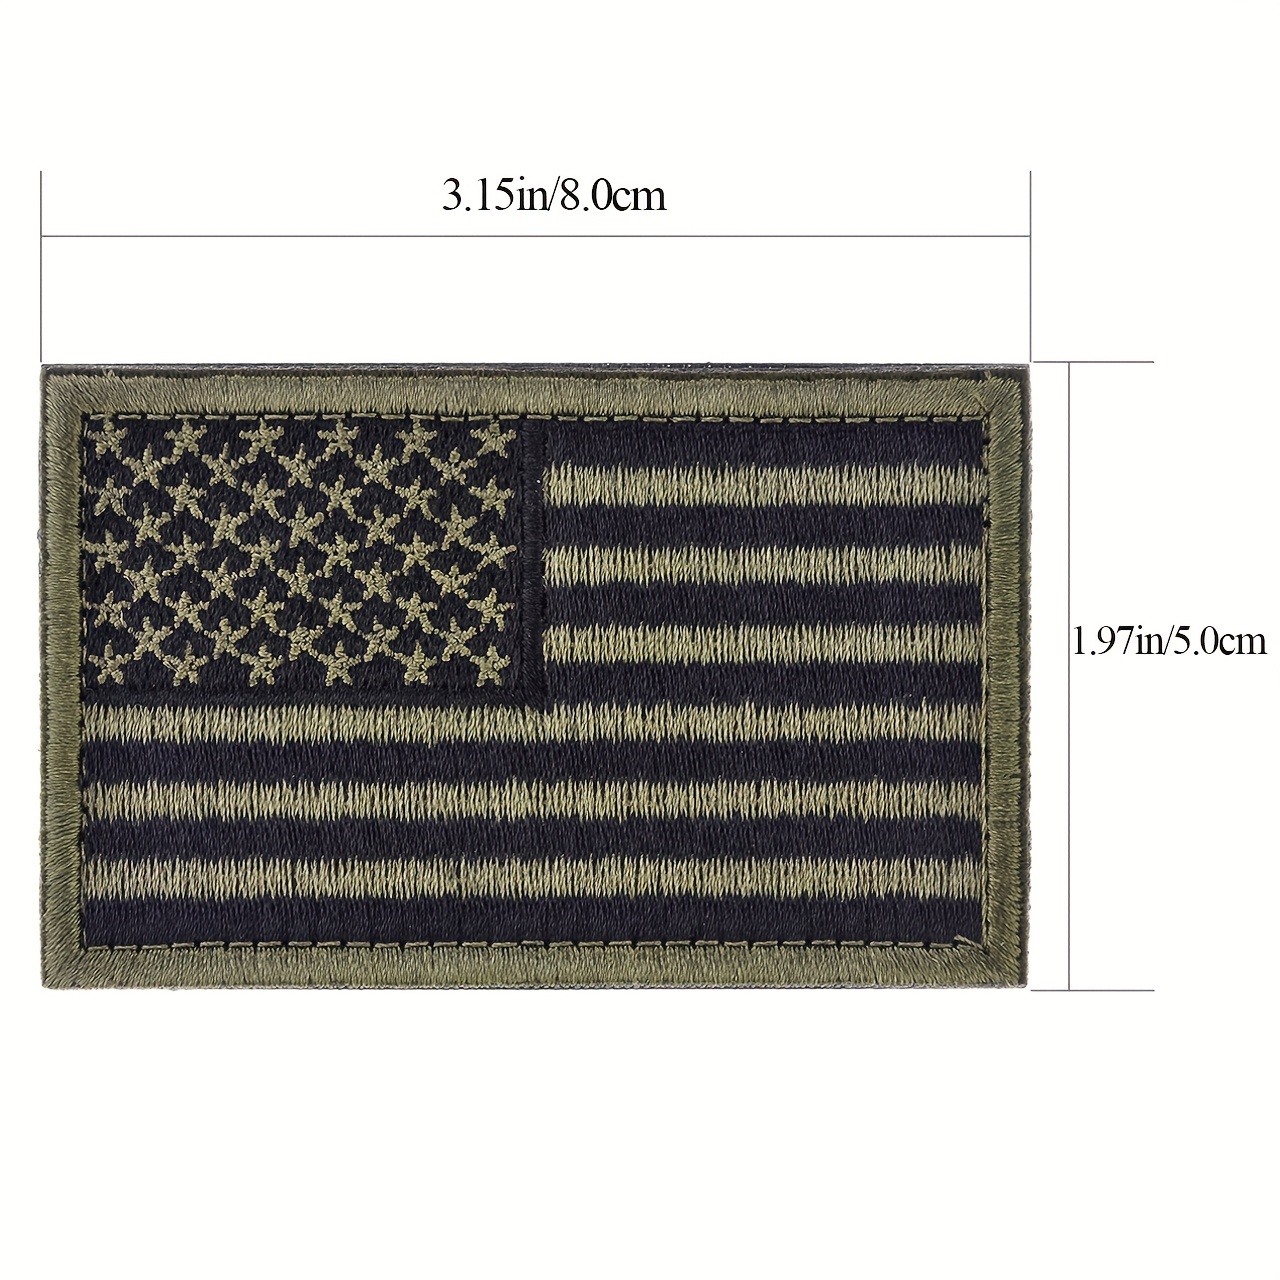 USA American United State Flag and Mexico Flag Patch Embroidered